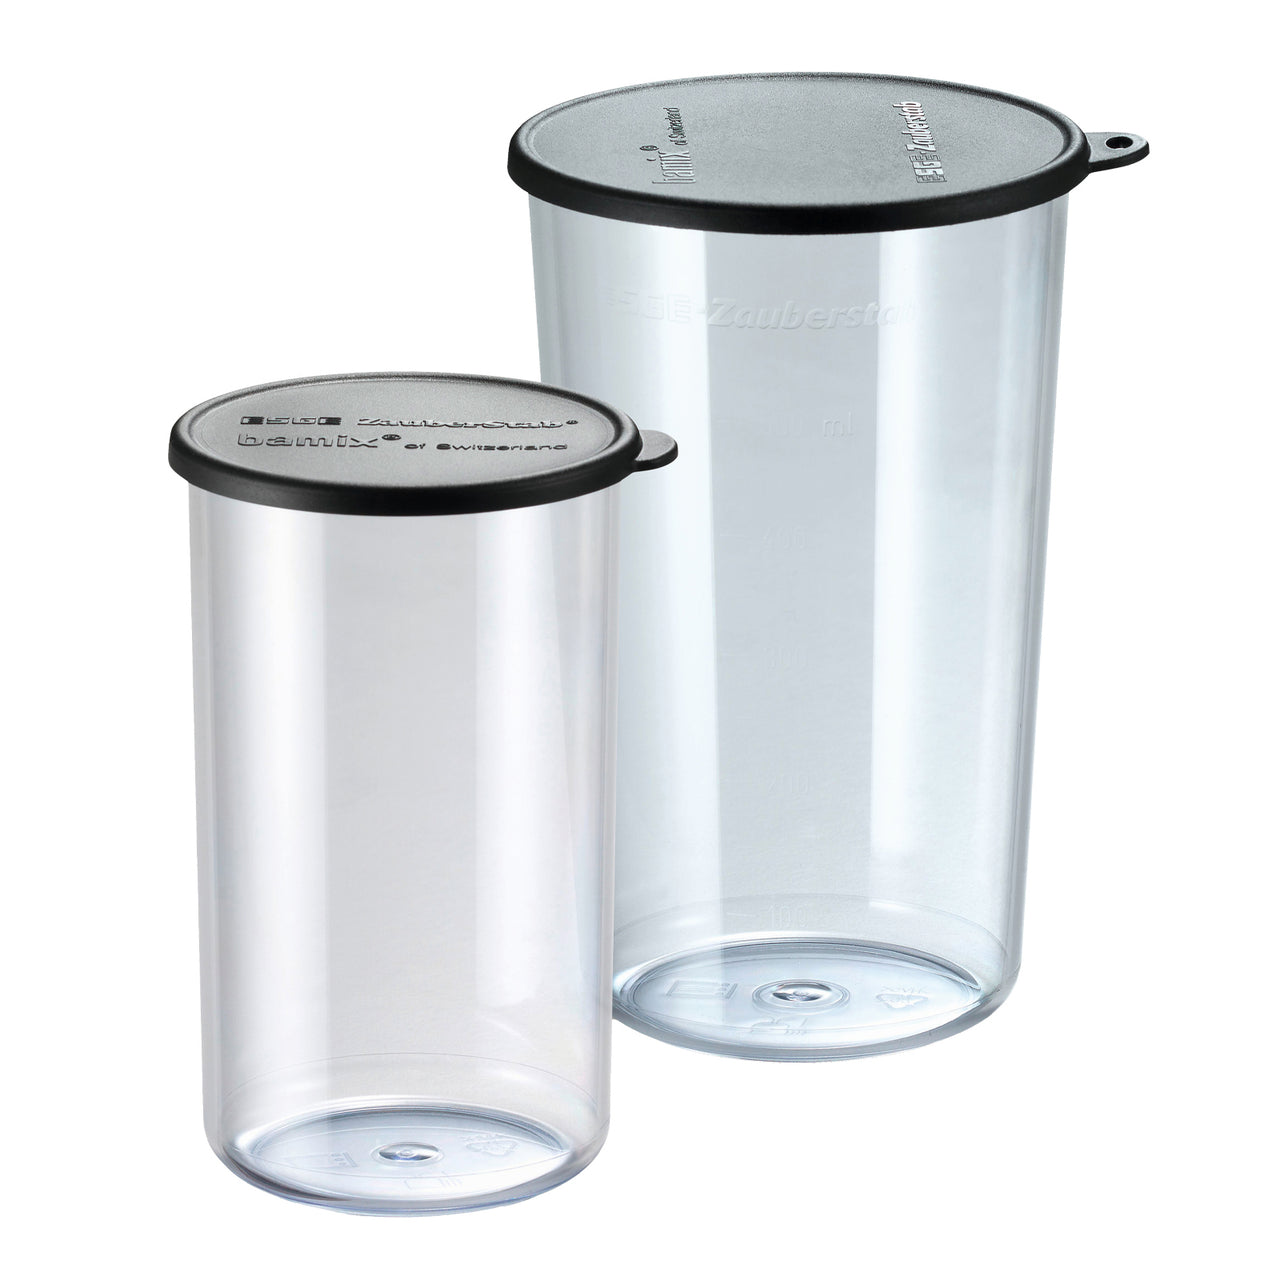 400ml + 600ml Beakers with Lids (Boxed)